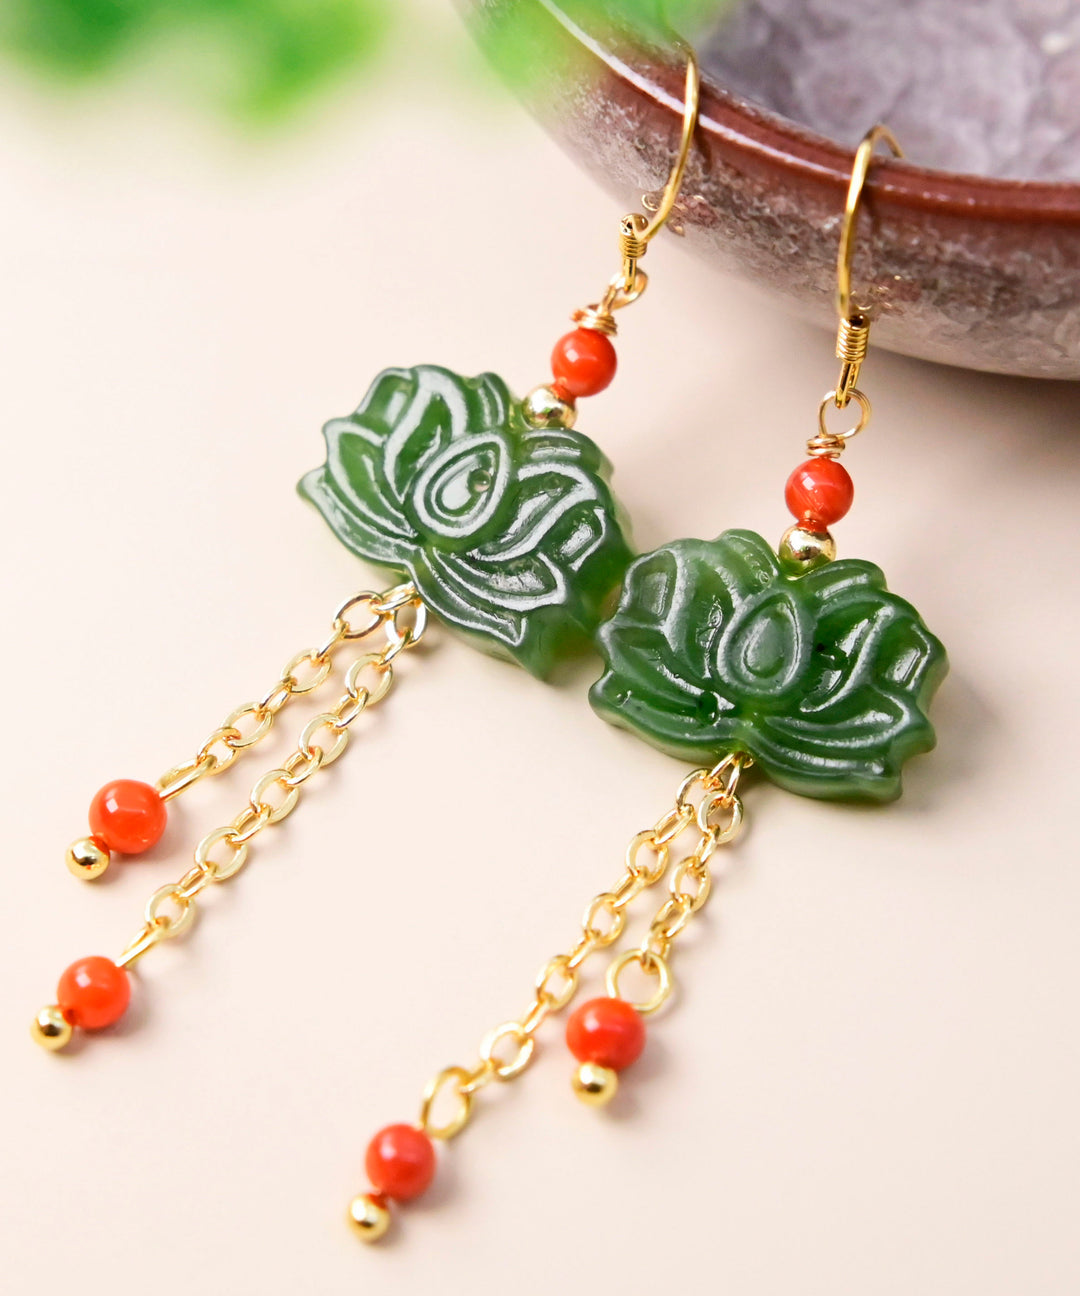 Unique Green Sterling Silver Overgild Inlaid Gem Stone Jade Drop Earrings